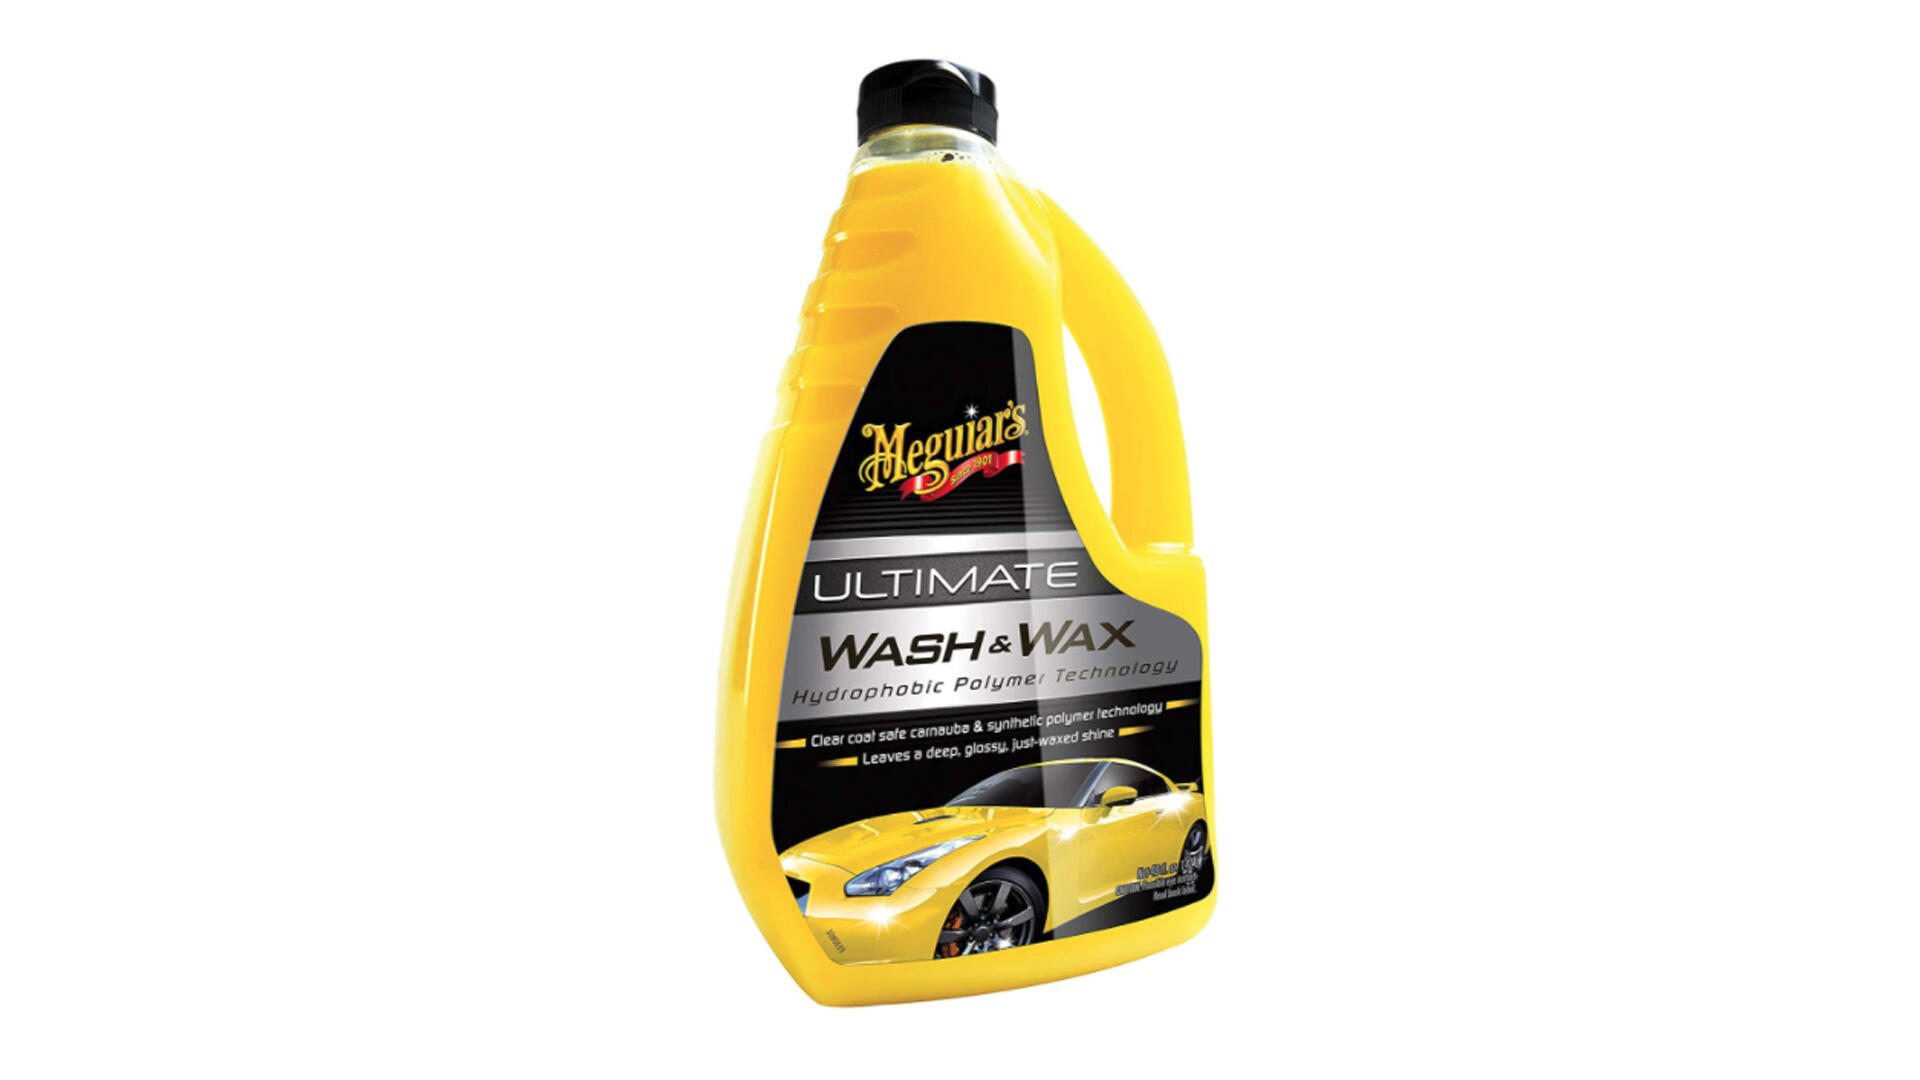 4 Tips for Choosing the Best Car Wash soap